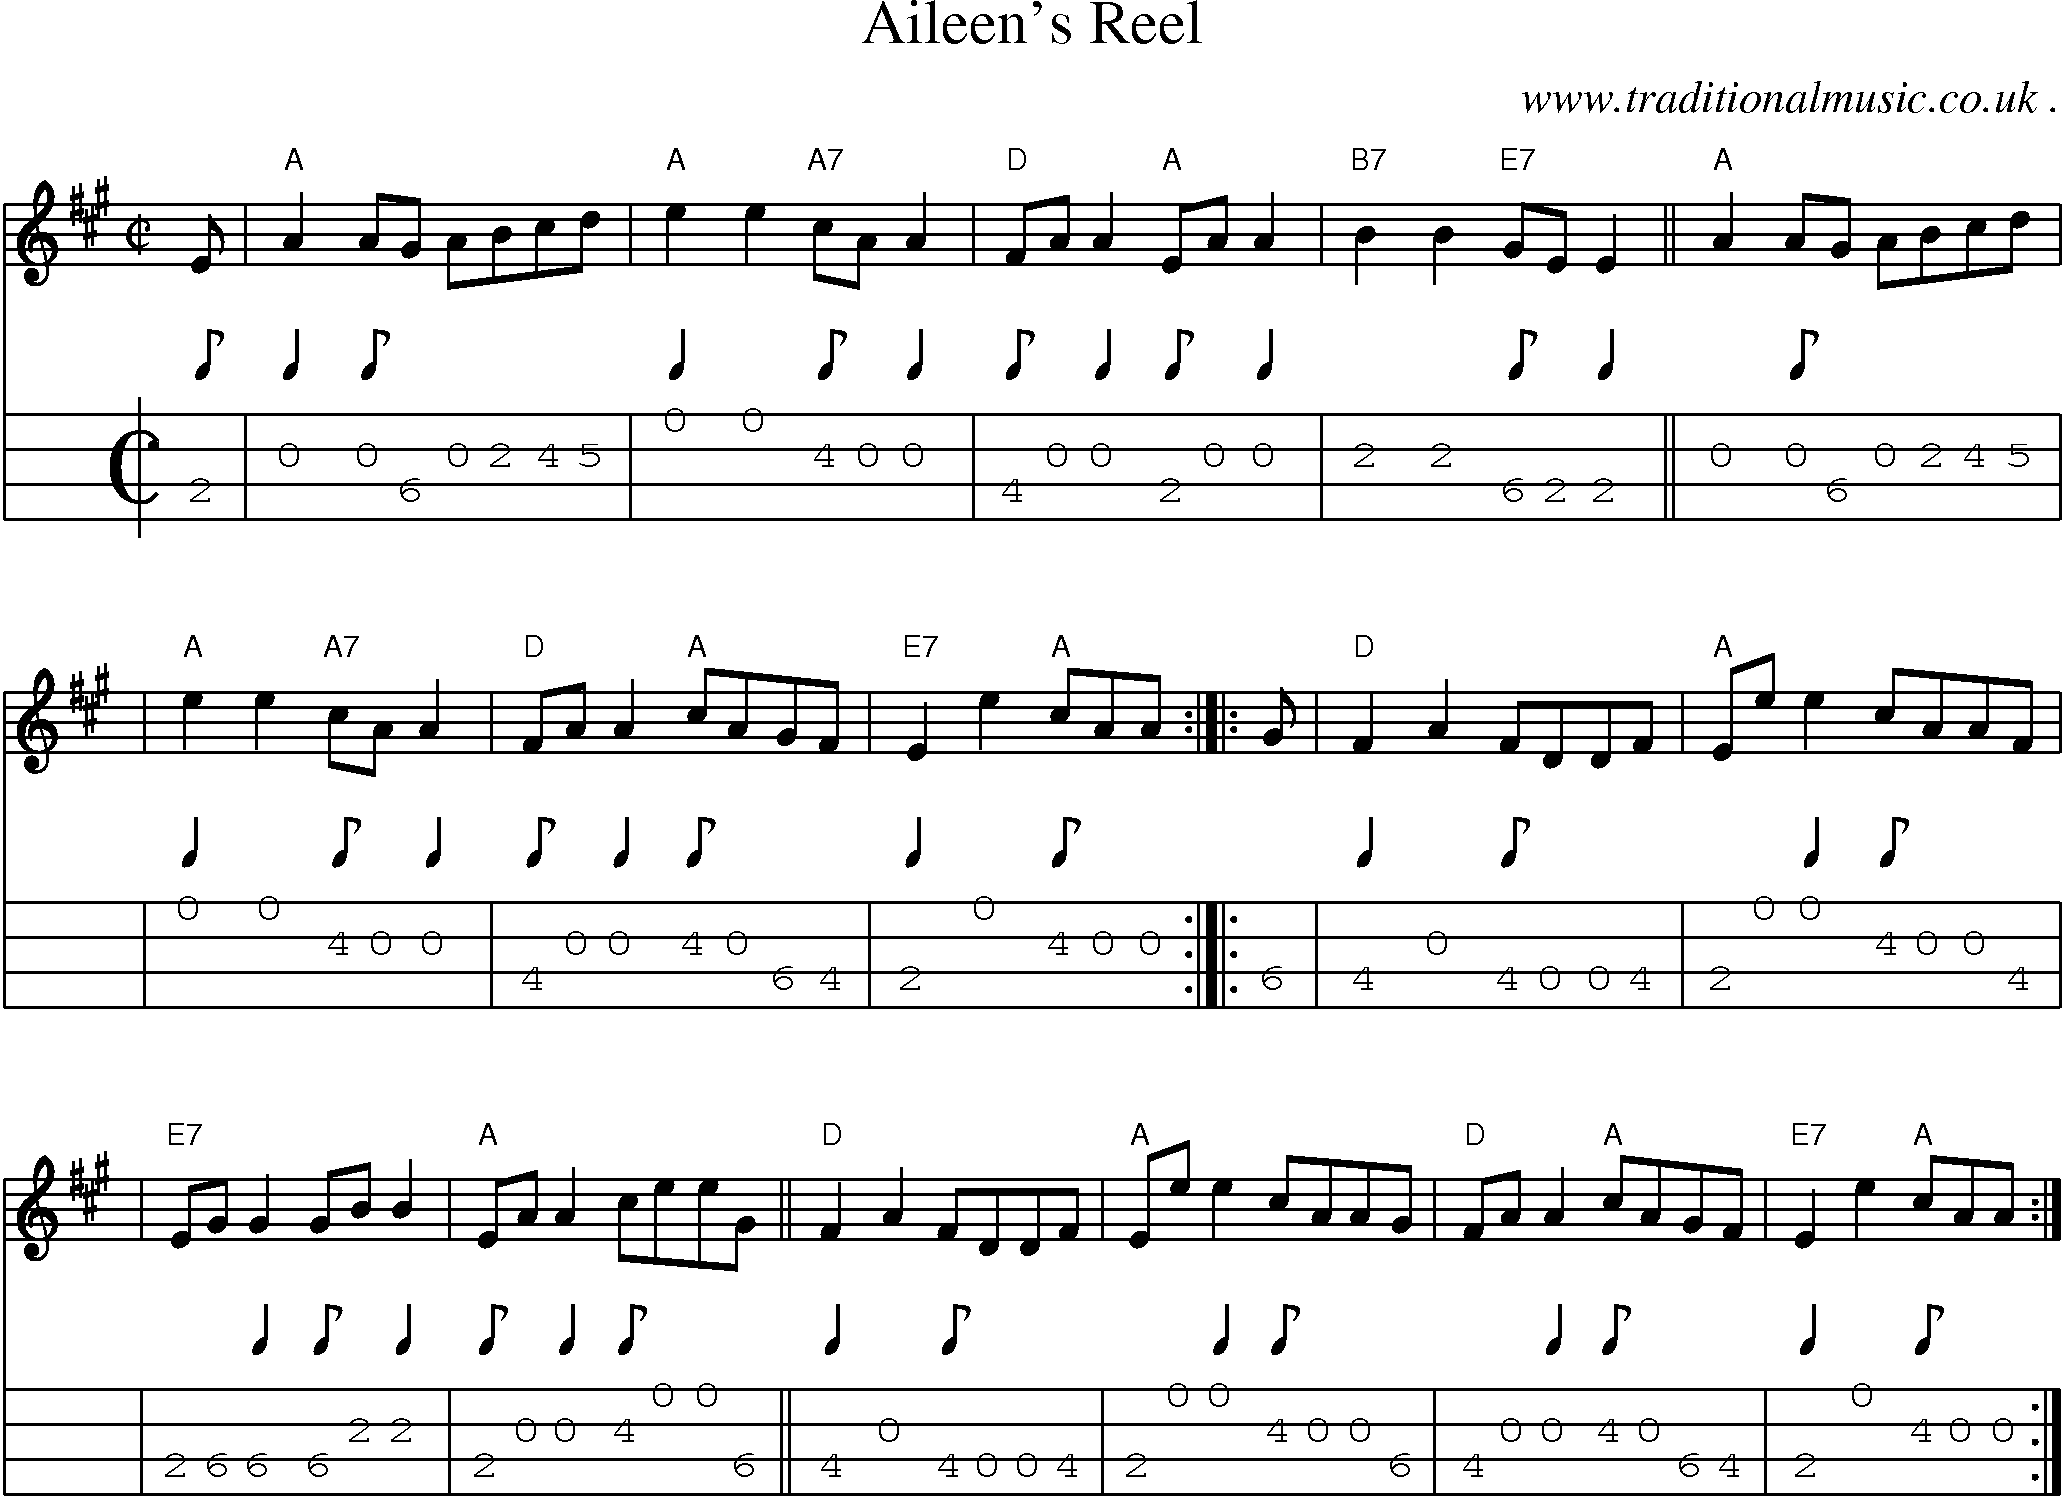 Sheet-music  score, Chords and Mandolin Tabs for Aileens Reel